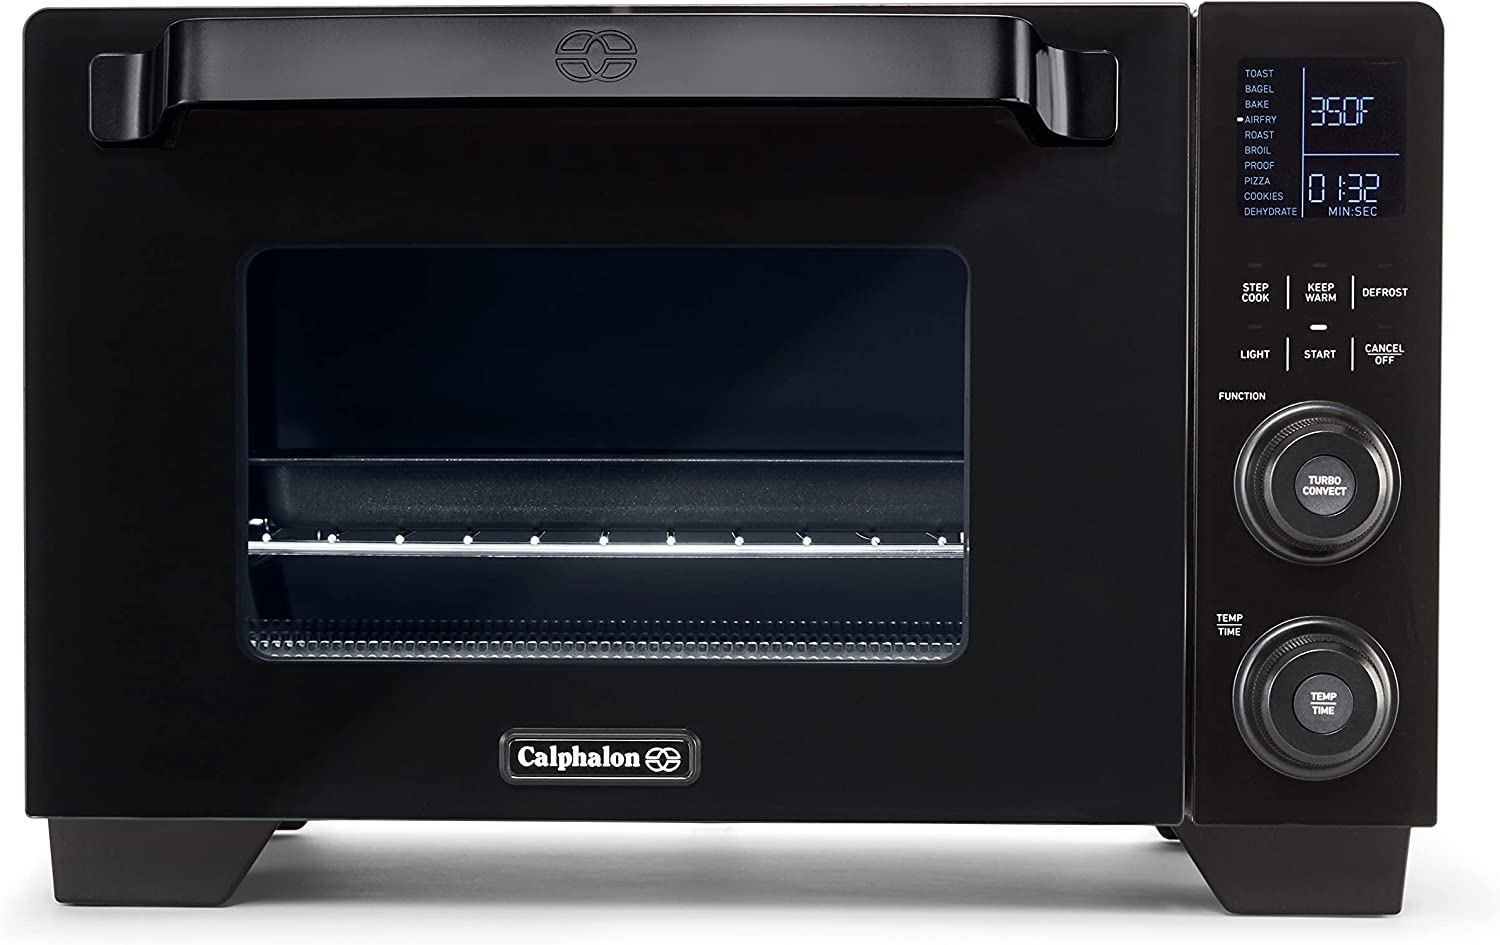 Calphalon Performance Cool Touch Toaster Oven with Turbo Convection, Large (2106488), Black/Silver Import To Shop ×Product